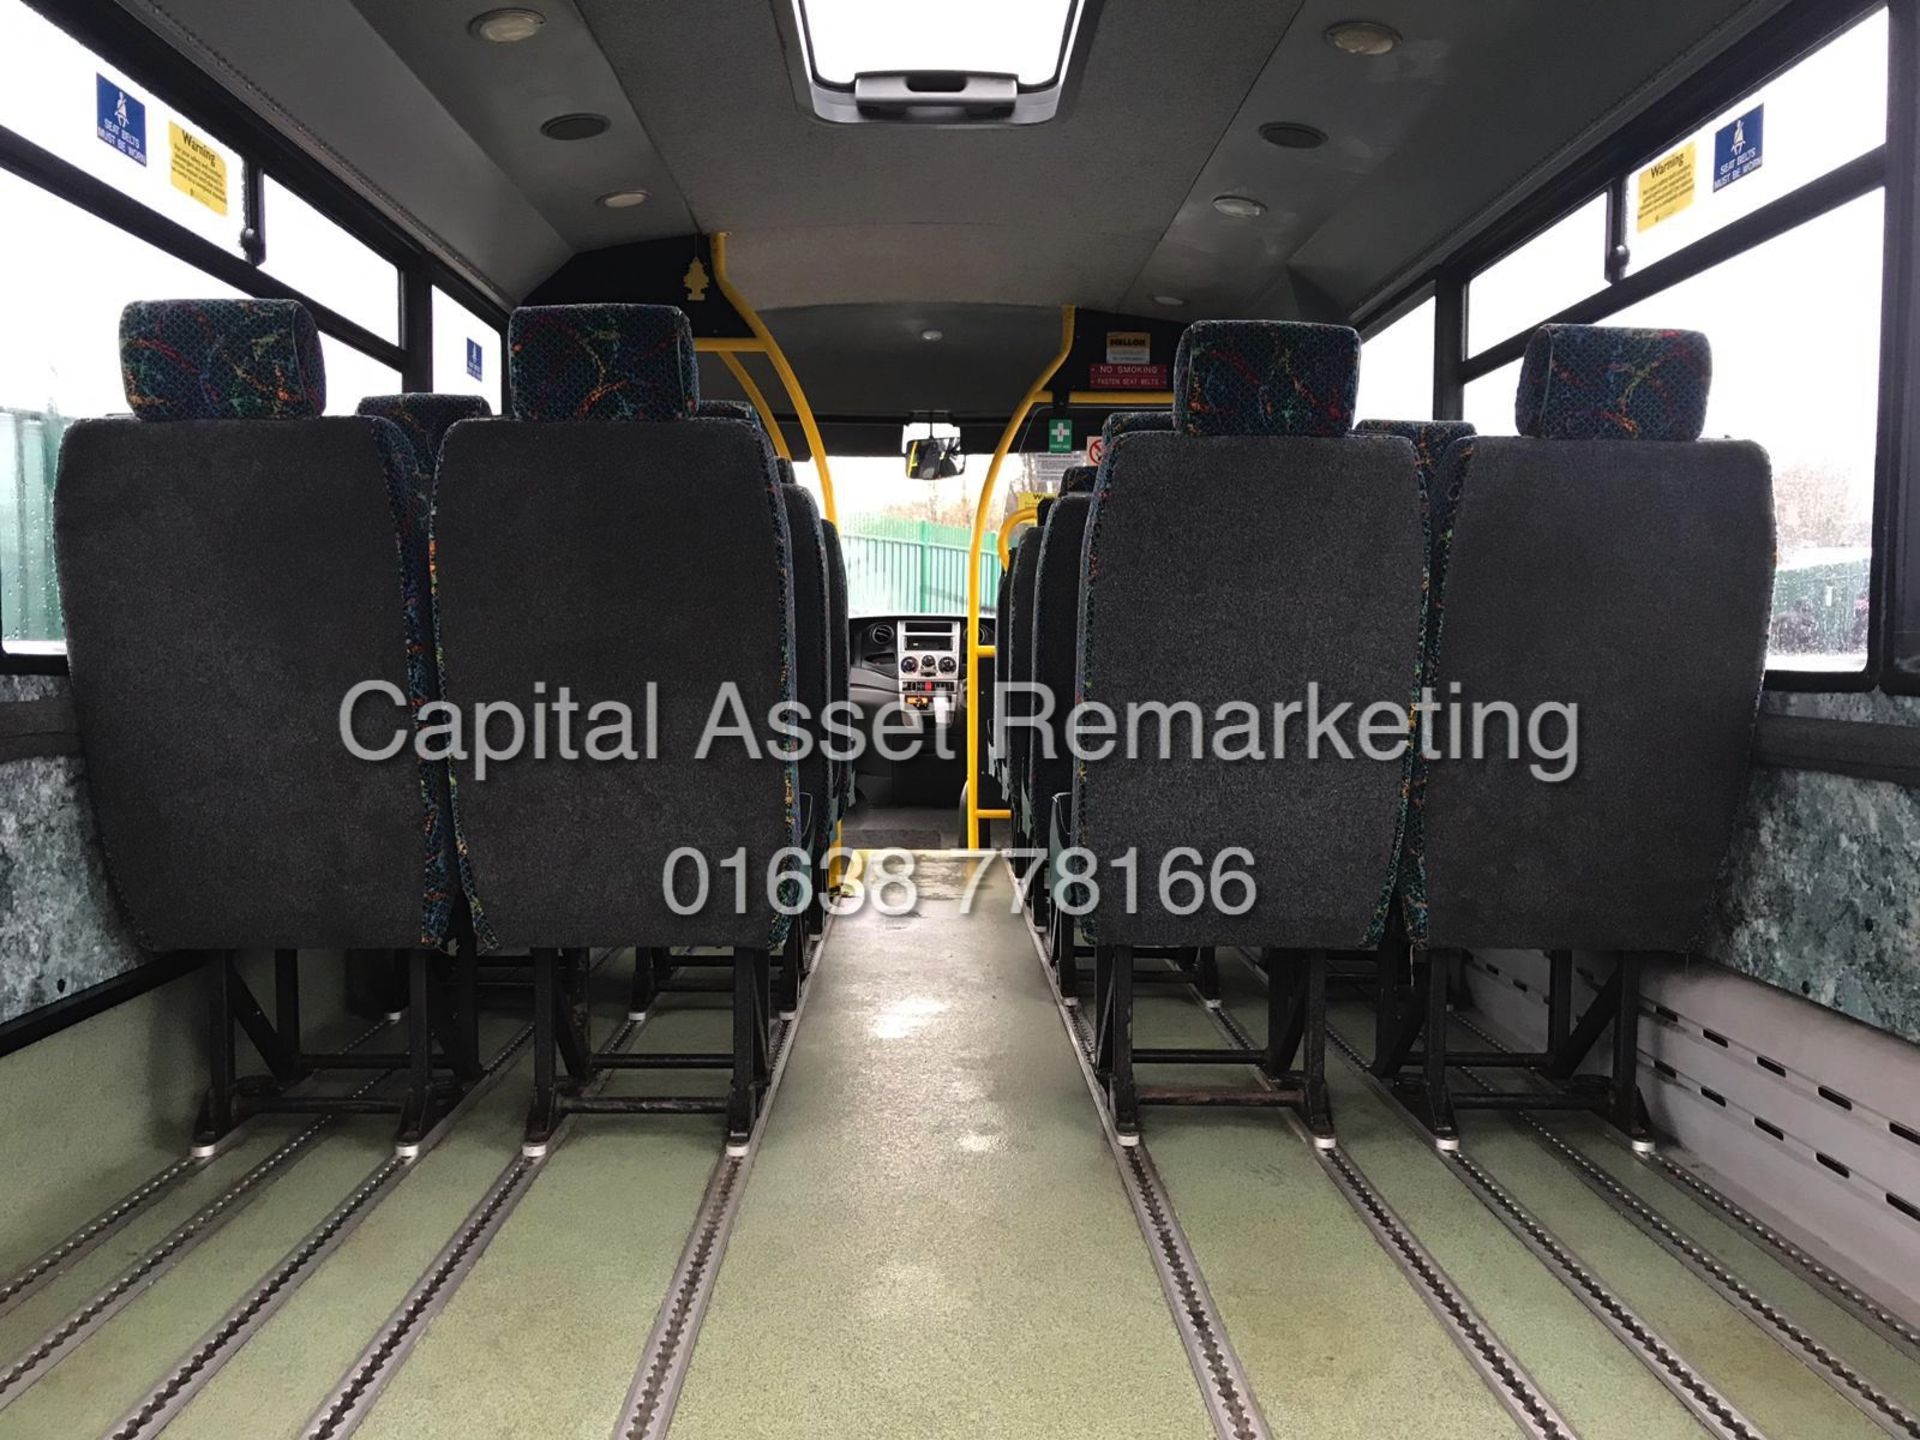 On Sale IVECO DAILY "IRIS BUS" 50C17 LWB 14 SEATER WITH WHEEL CHAIR LIFT - 10 REG - 1 KEEPER - COIF - Image 7 of 14